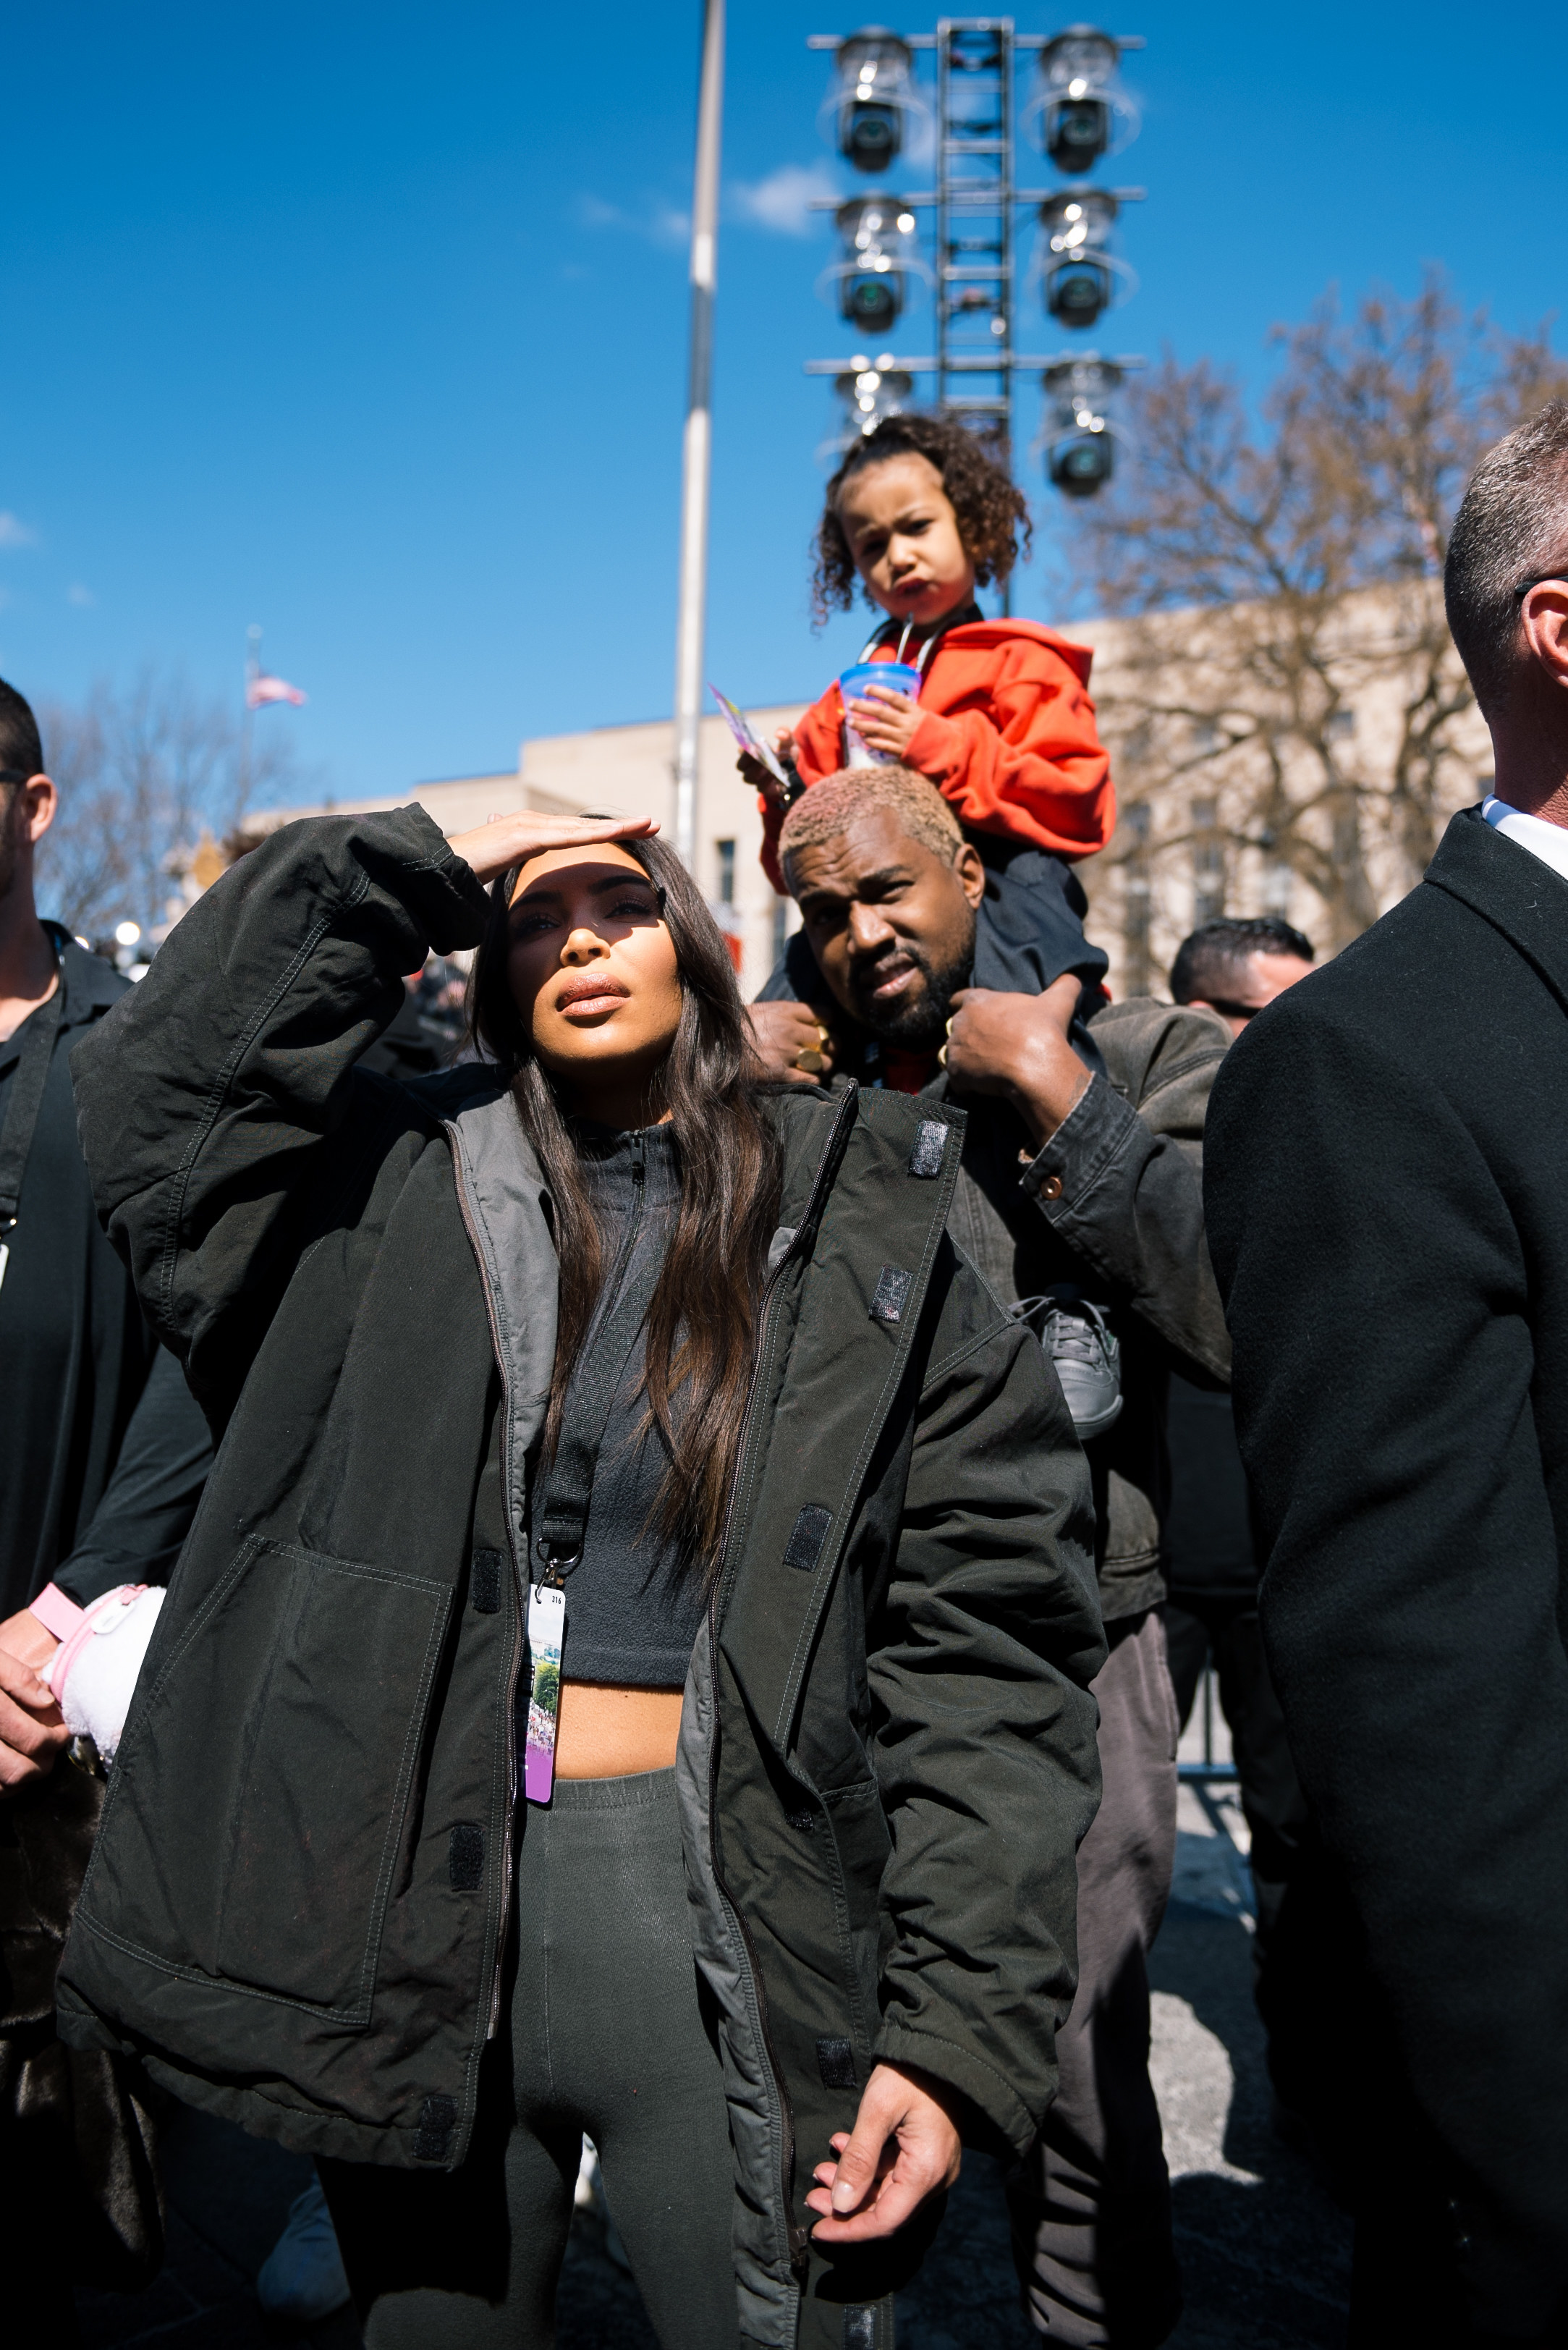 Kim Kardashian and Kanye West along with Daughter North West, show up to support March For Our Lives in Washington DC on March 24, 2018.